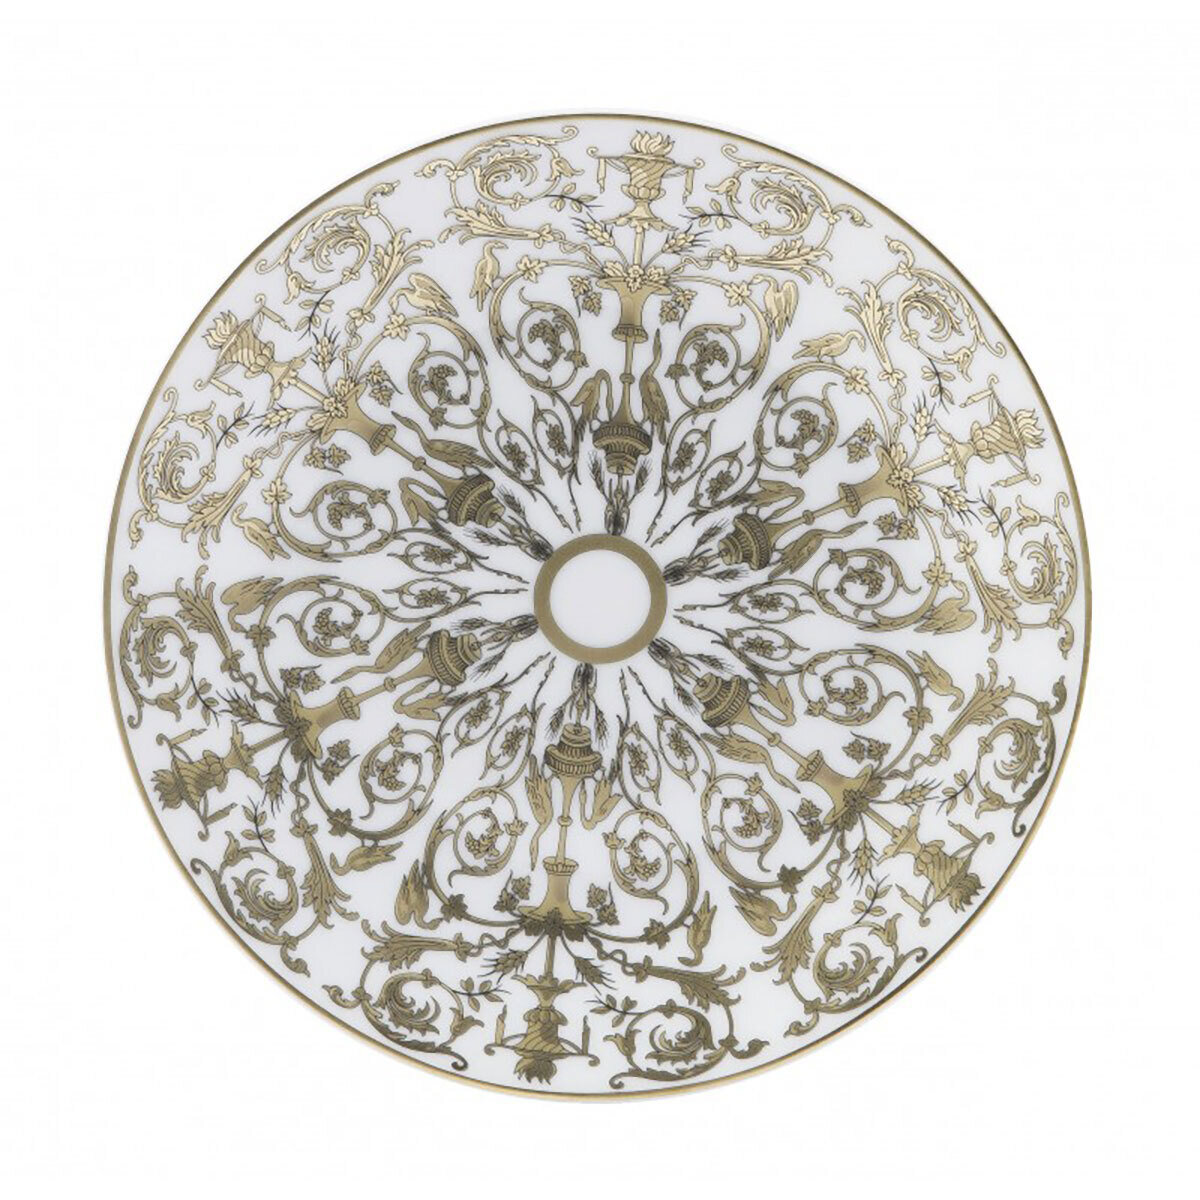 Deshoulieres Tuileries White Bread & Butter Plate 034862